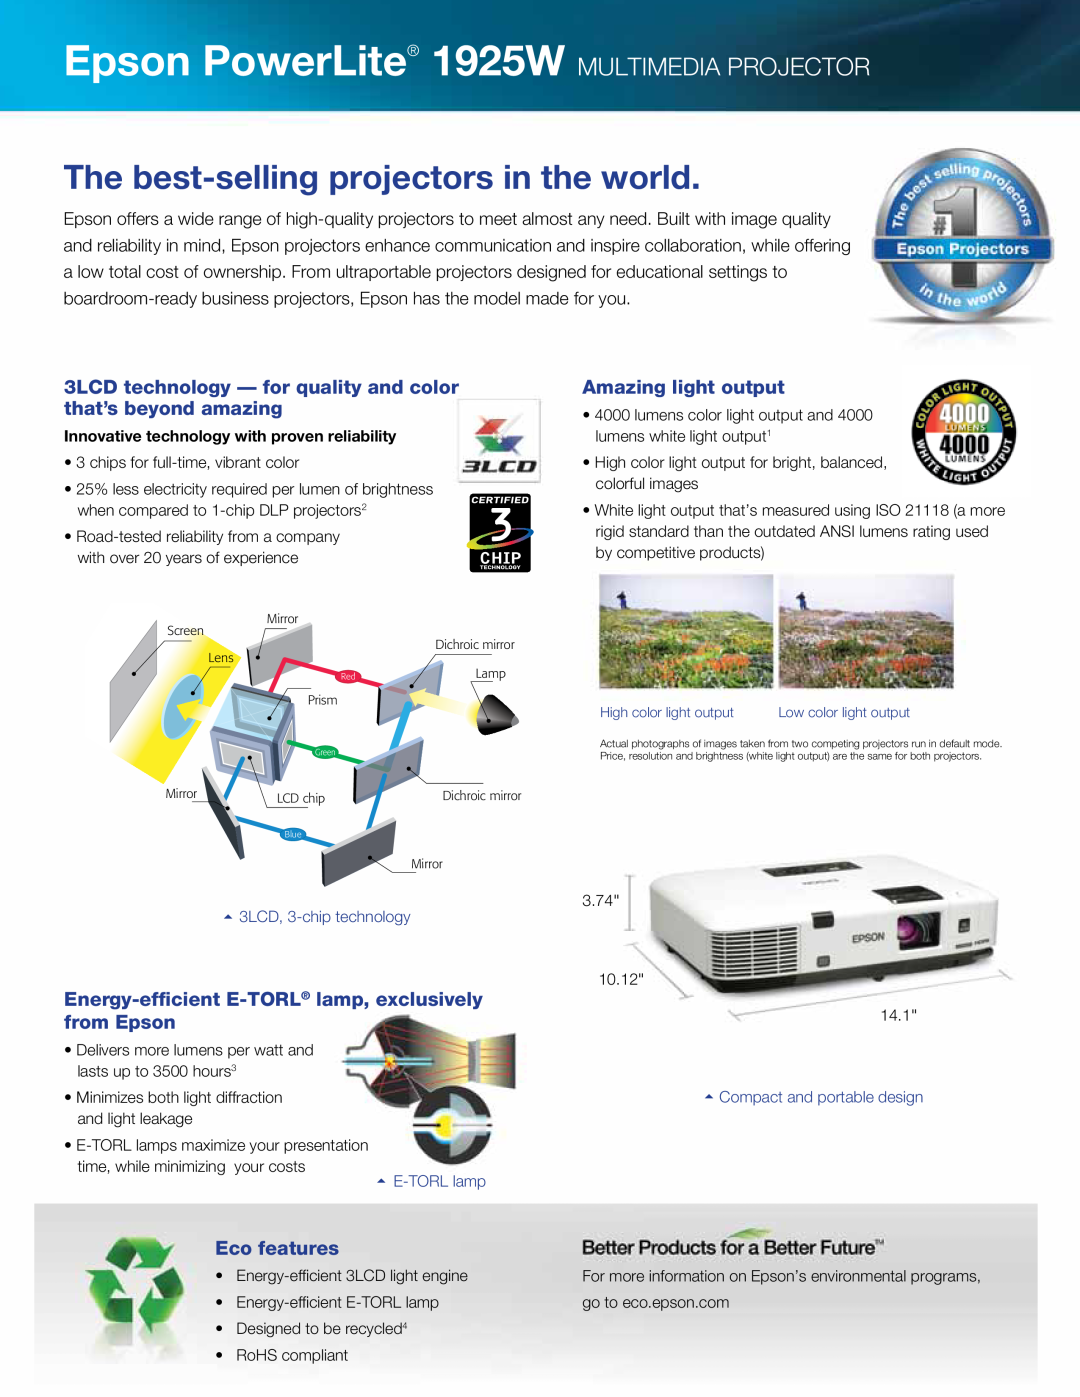 Epson Epson PowerLite 1925W MULTIMEDIA PROJECTOR, The best-selling projectors in the world, Eco features, E-TORL lamp 